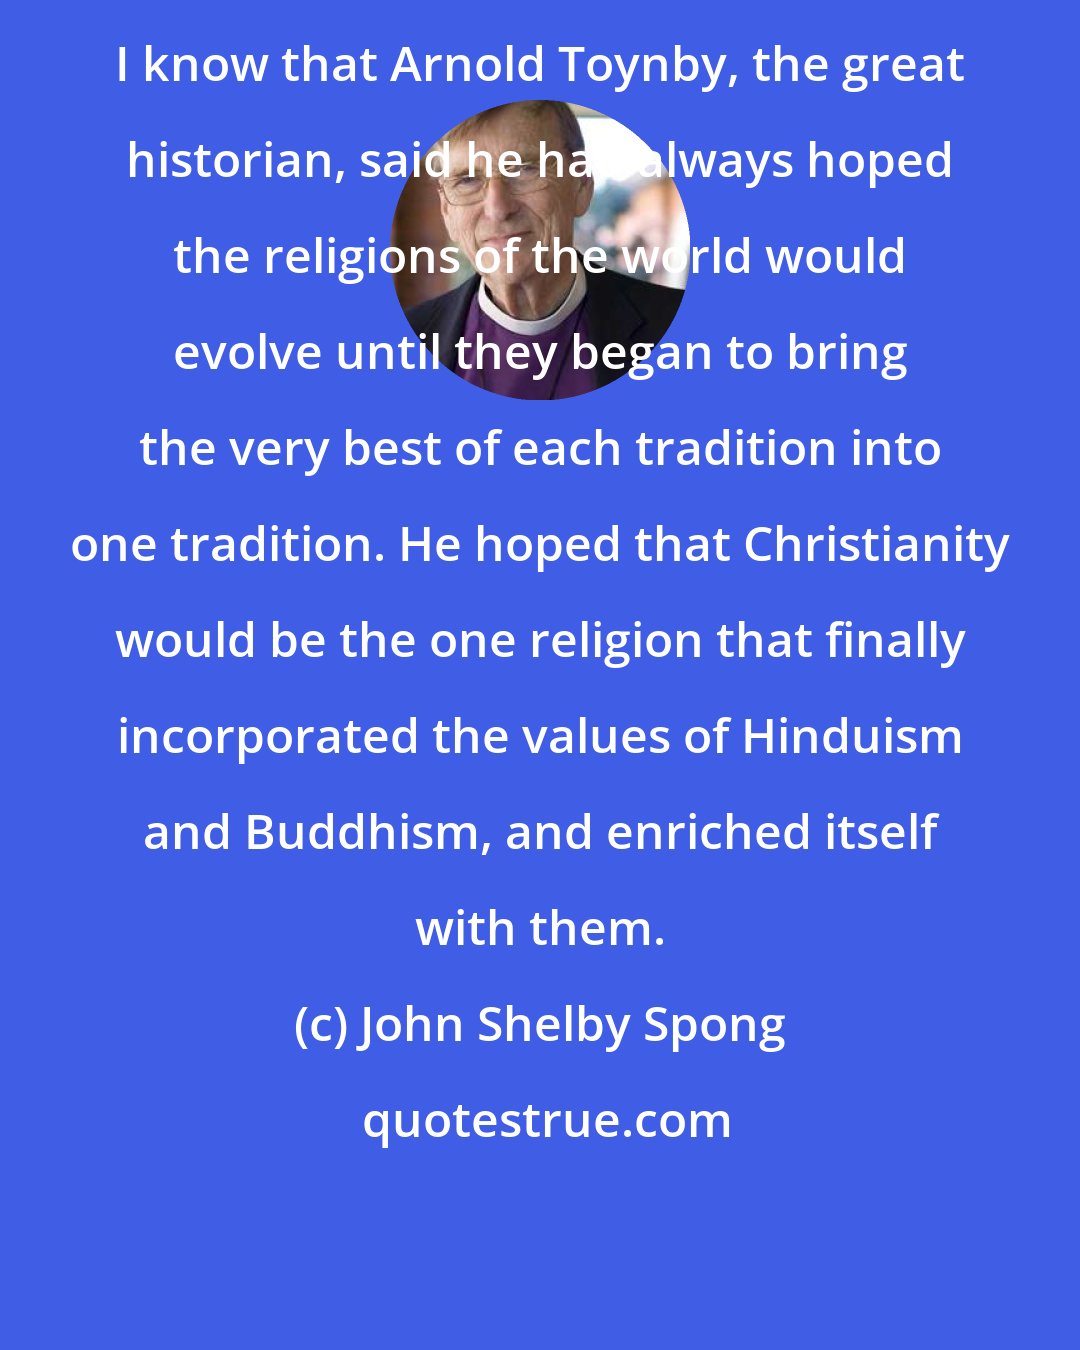 John Shelby Spong: I know that Arnold Toynby, the great historian, said he had always hoped the religions of the world would evolve until they began to bring the very best of each tradition into one tradition. He hoped that Christianity would be the one religion that finally incorporated the values of Hinduism and Buddhism, and enriched itself with them.